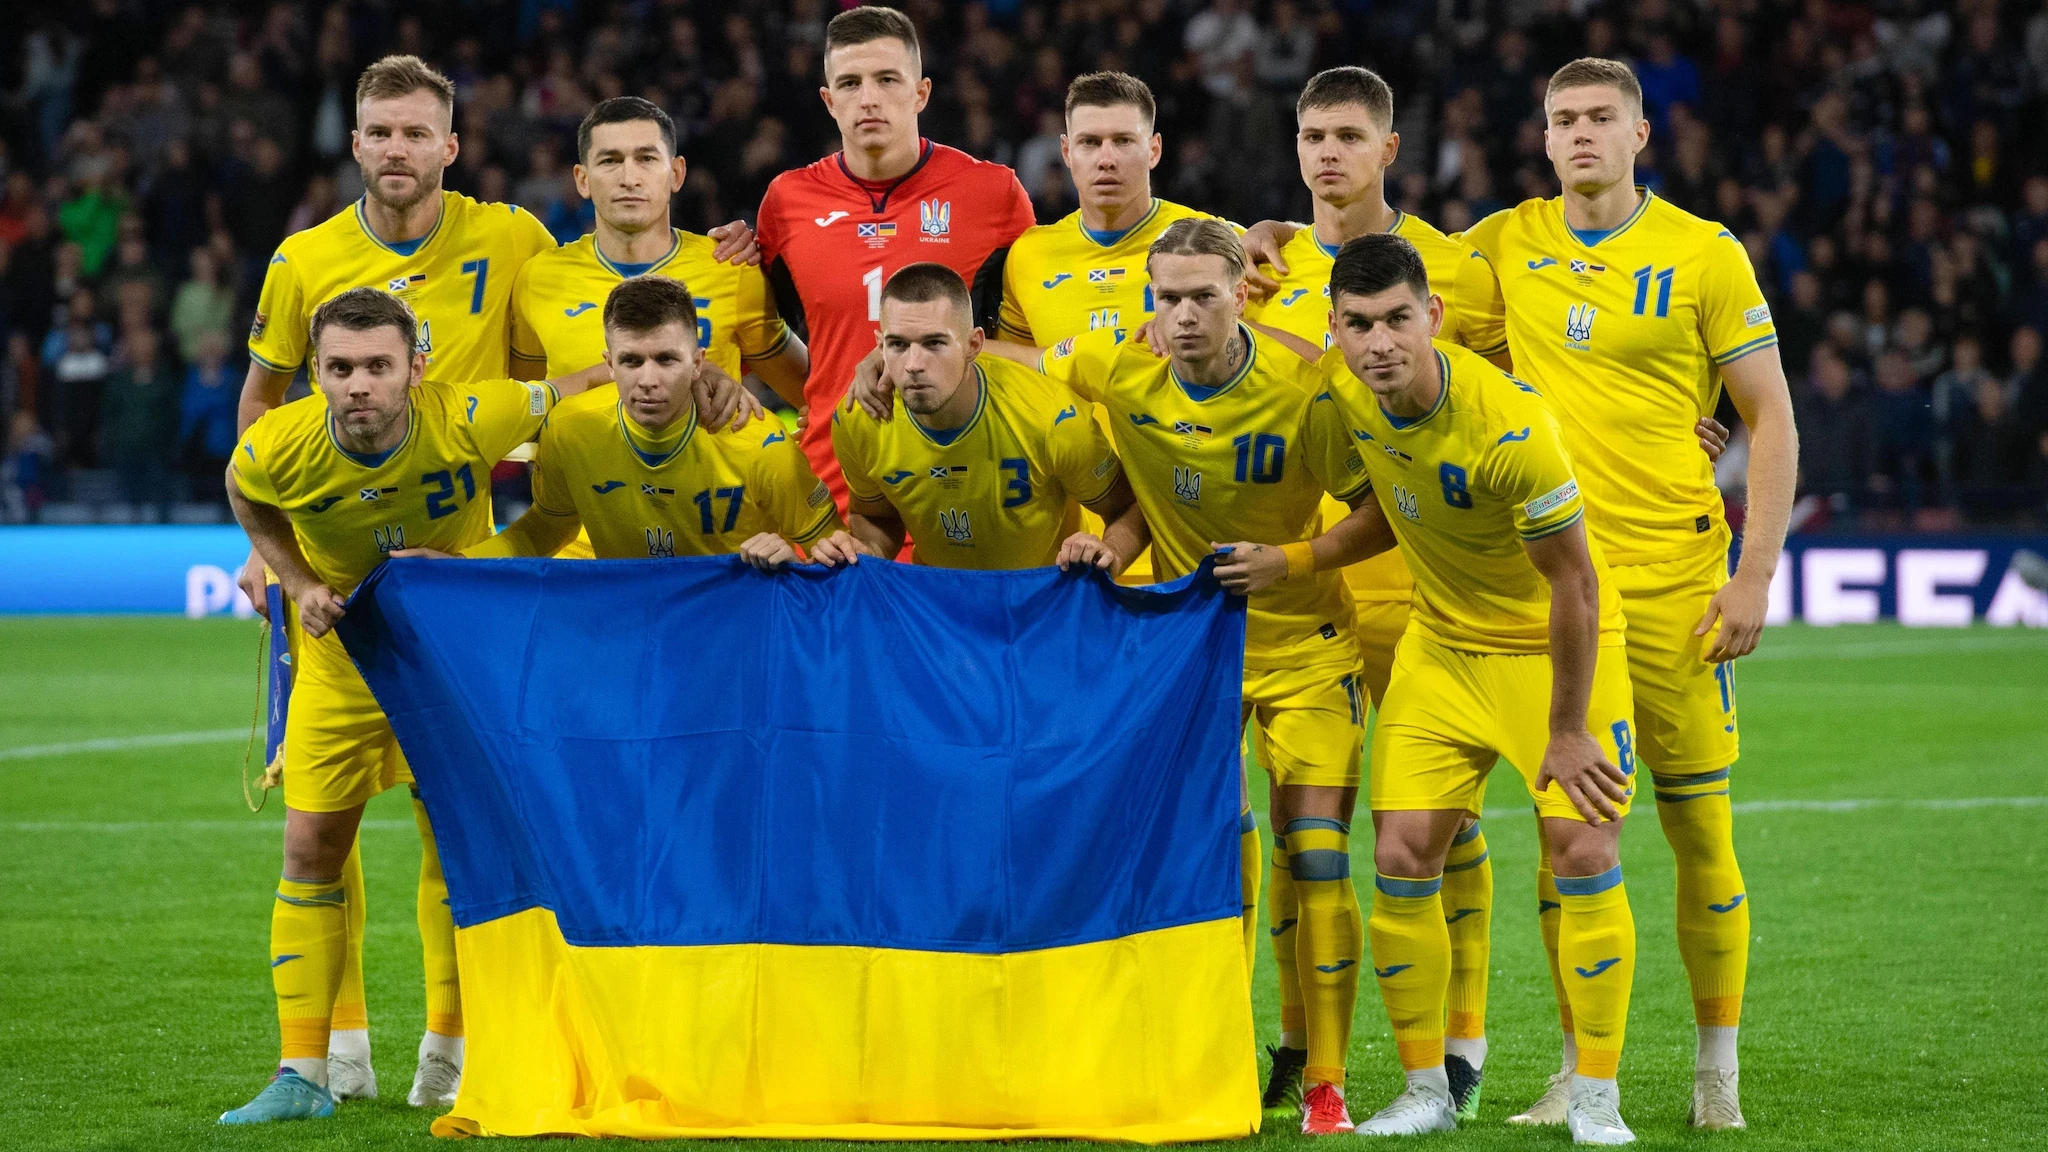 Joma are the official kit supplier of Ukraine's national team ©Getty Images